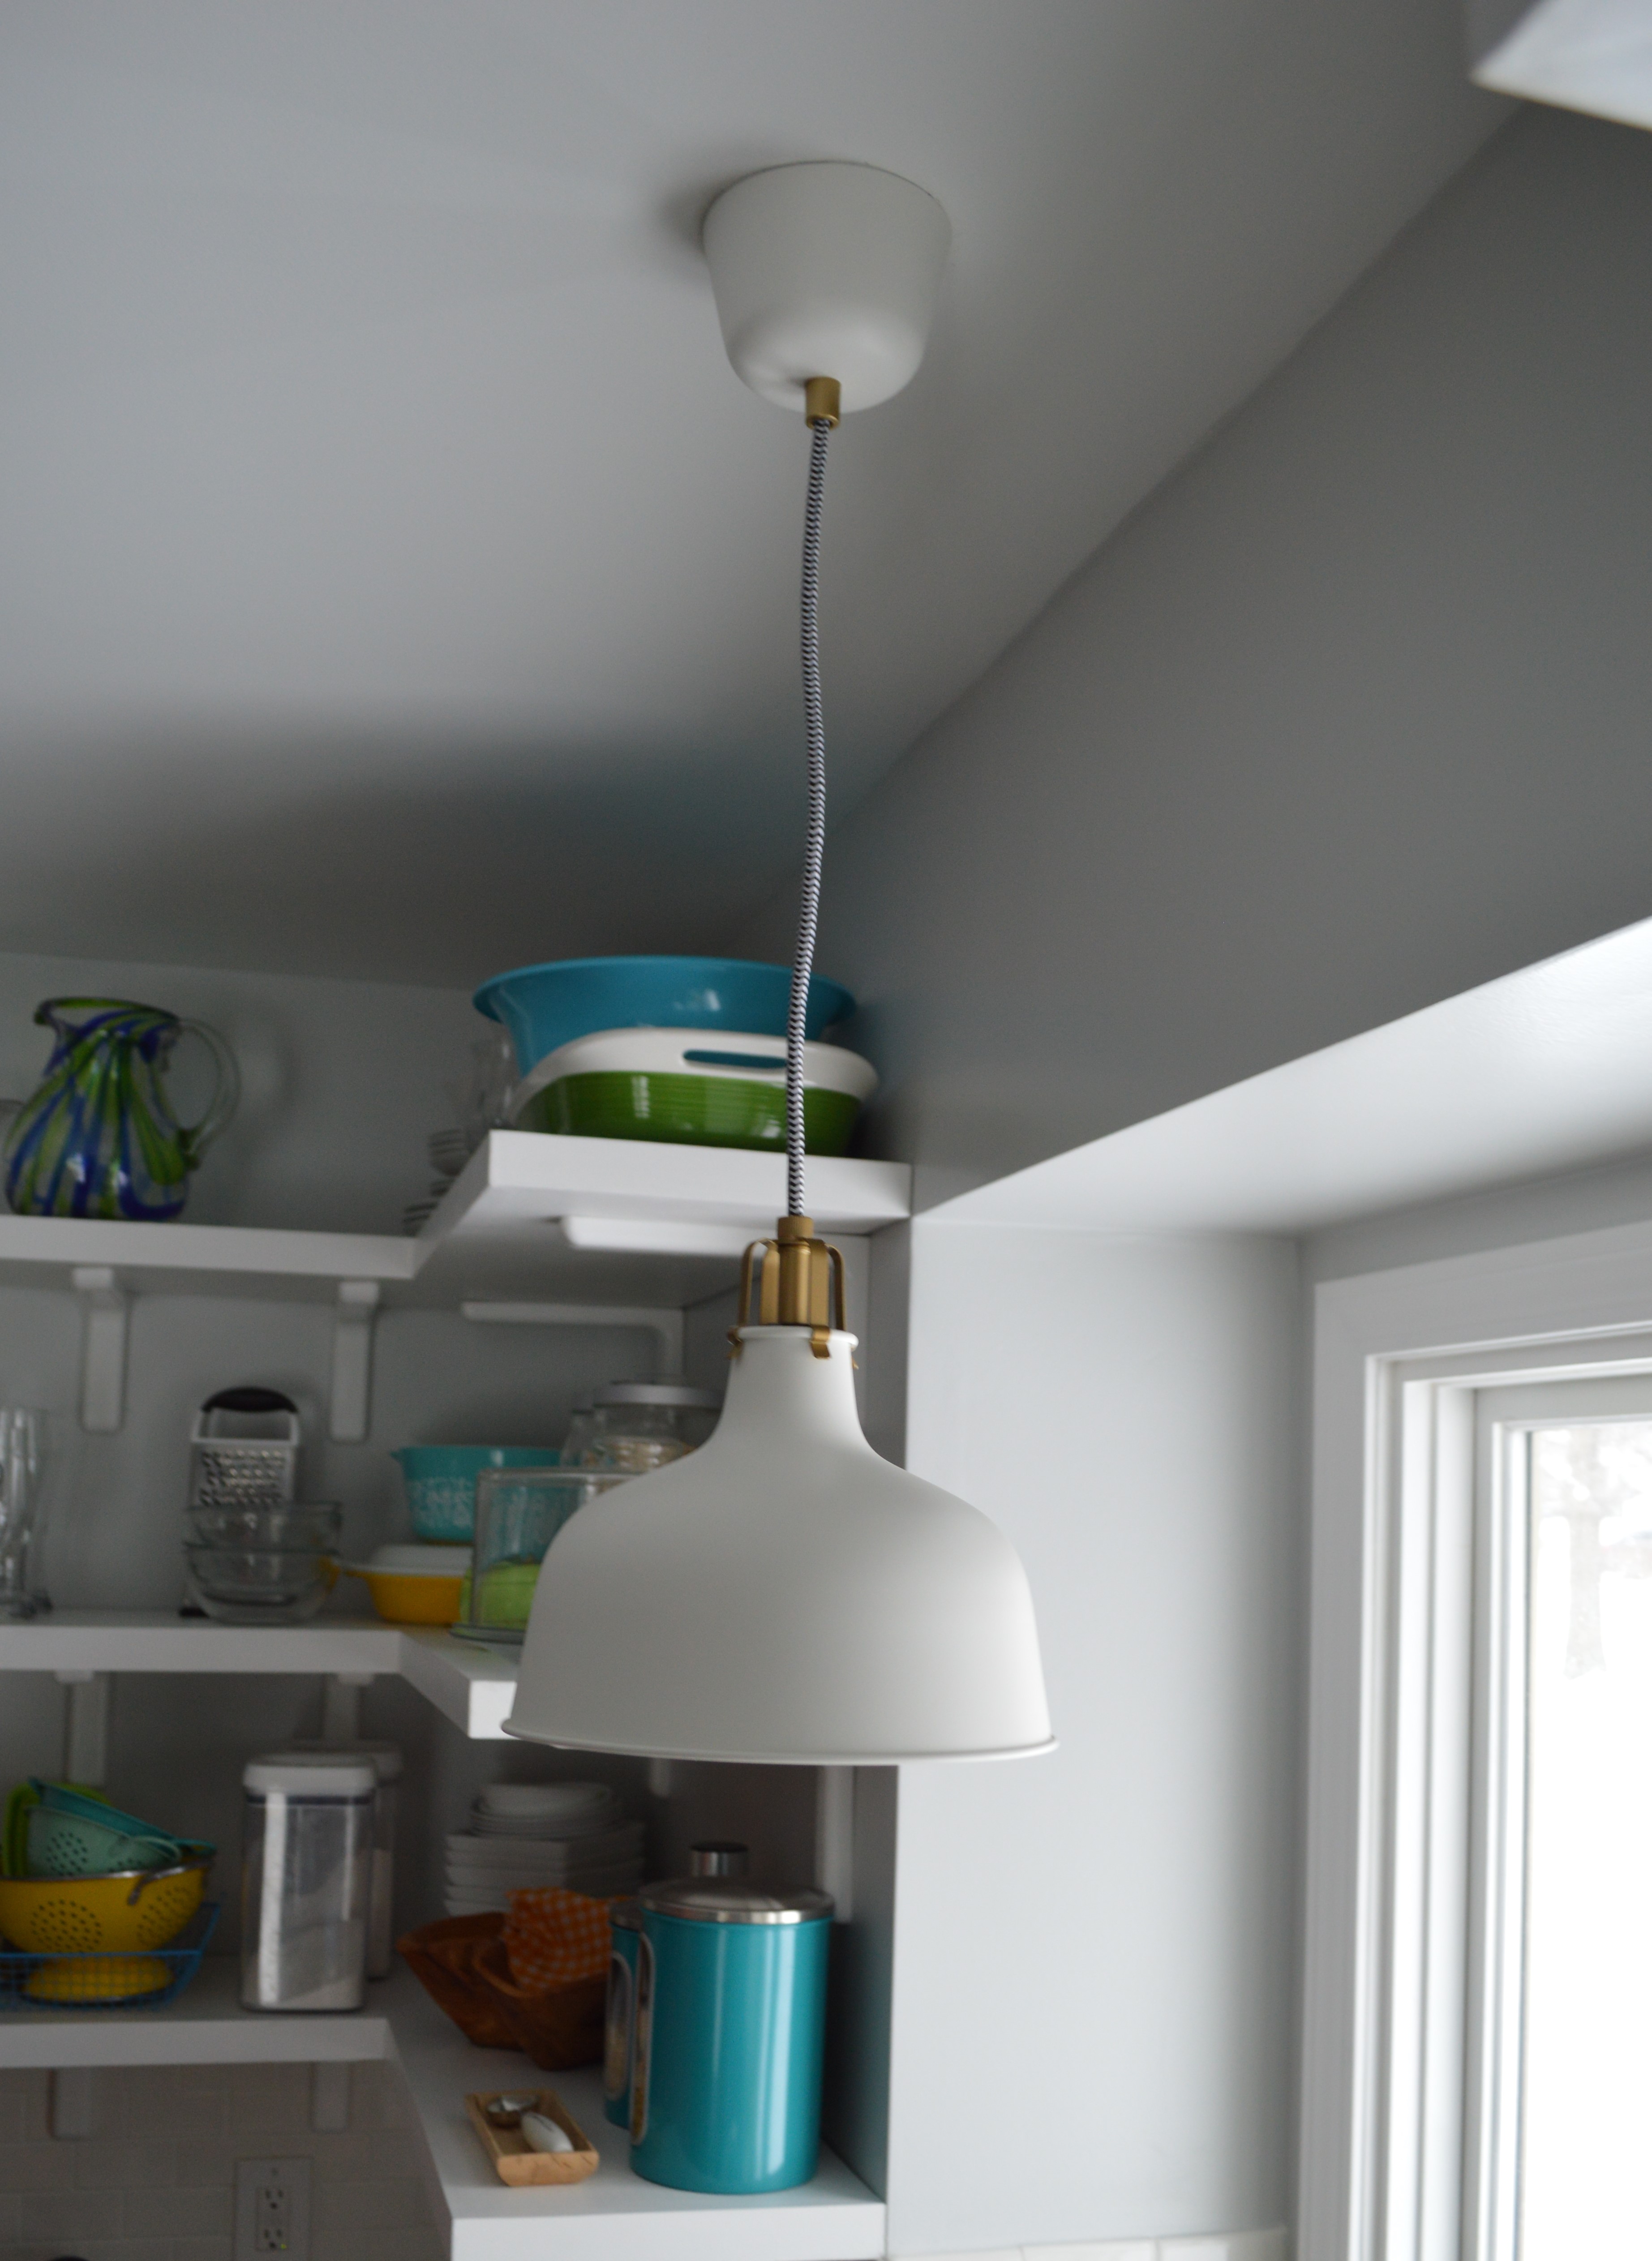 A Pretty Pendant Loving Here, Ikea Hanging Lights With Cord